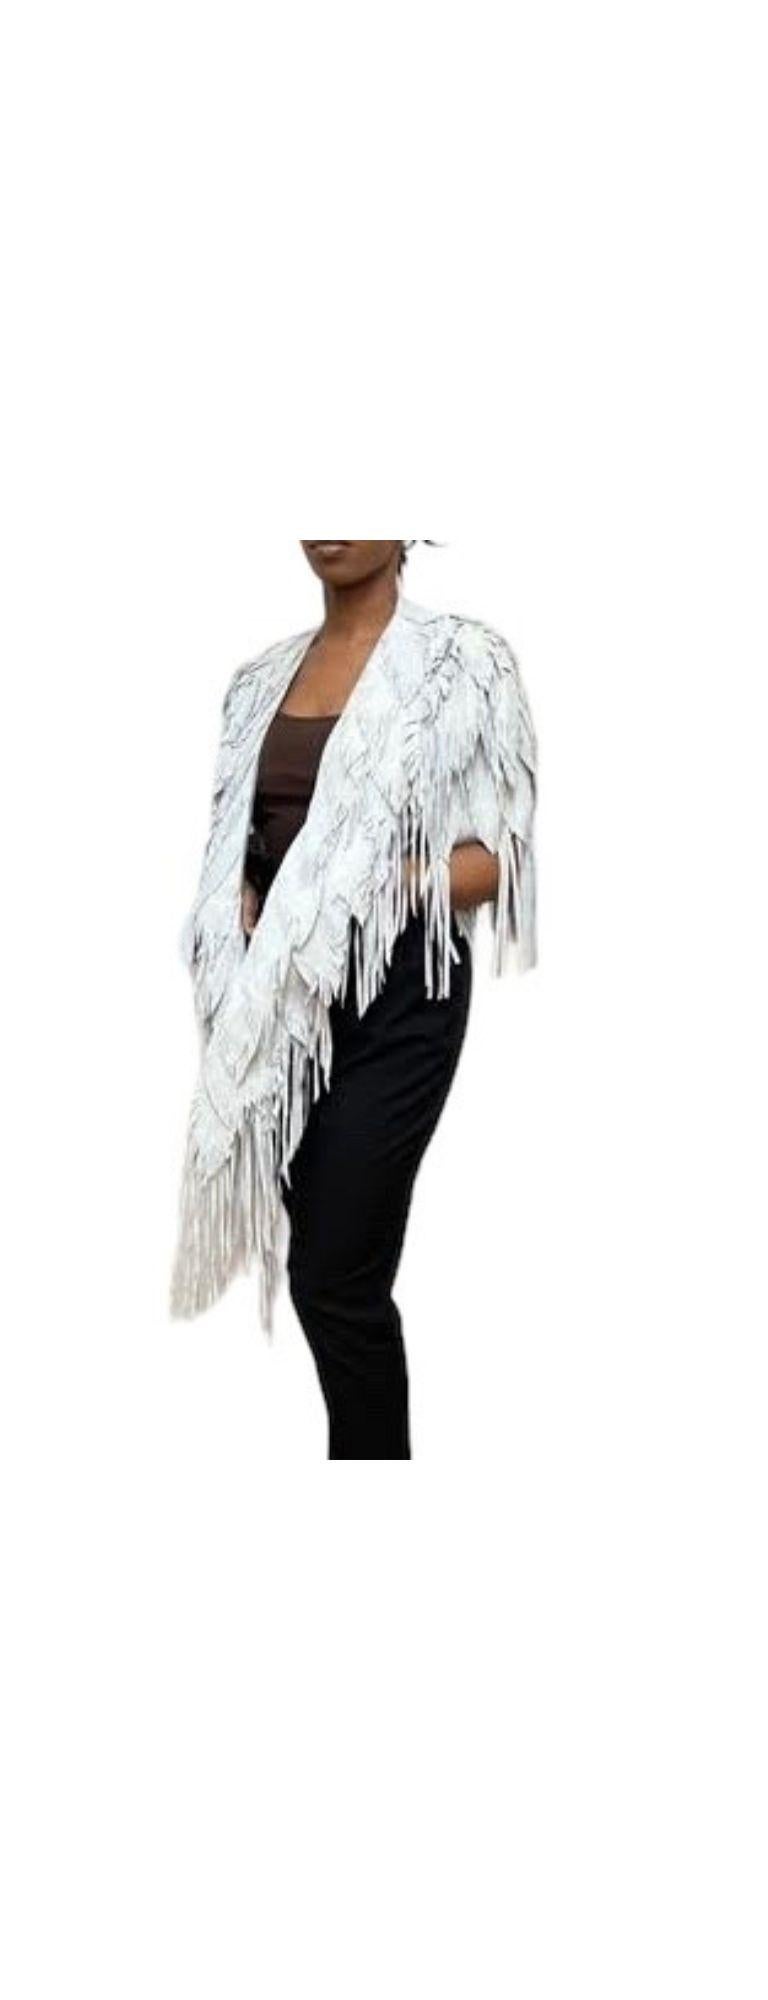 Each Feather-Leather is made by hand by our friends in Columbia in their co-op owned and operated facilities.  Morphew Collection Dove Suede Fringe Feather Leather Long Cape with two front pockets and one hidden pocket.

MORPHEW COLLECTION is made